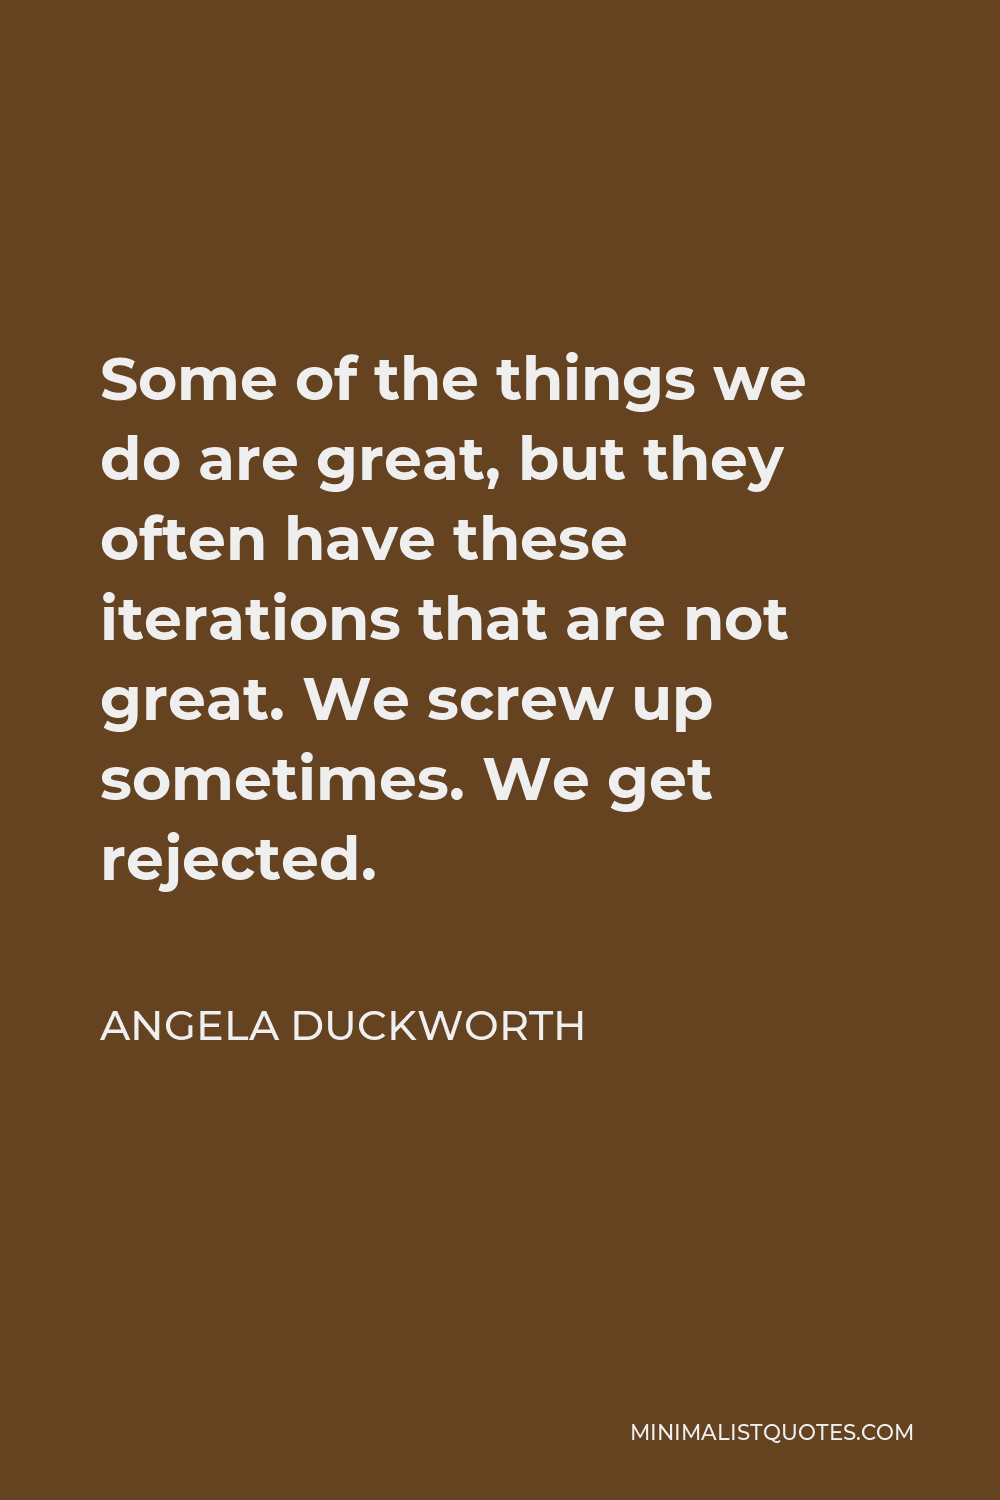 Angela Duckworth Quote - Some of the things we do are great, but they often have these iterations that are not great. We screw up sometimes. We get rejected.